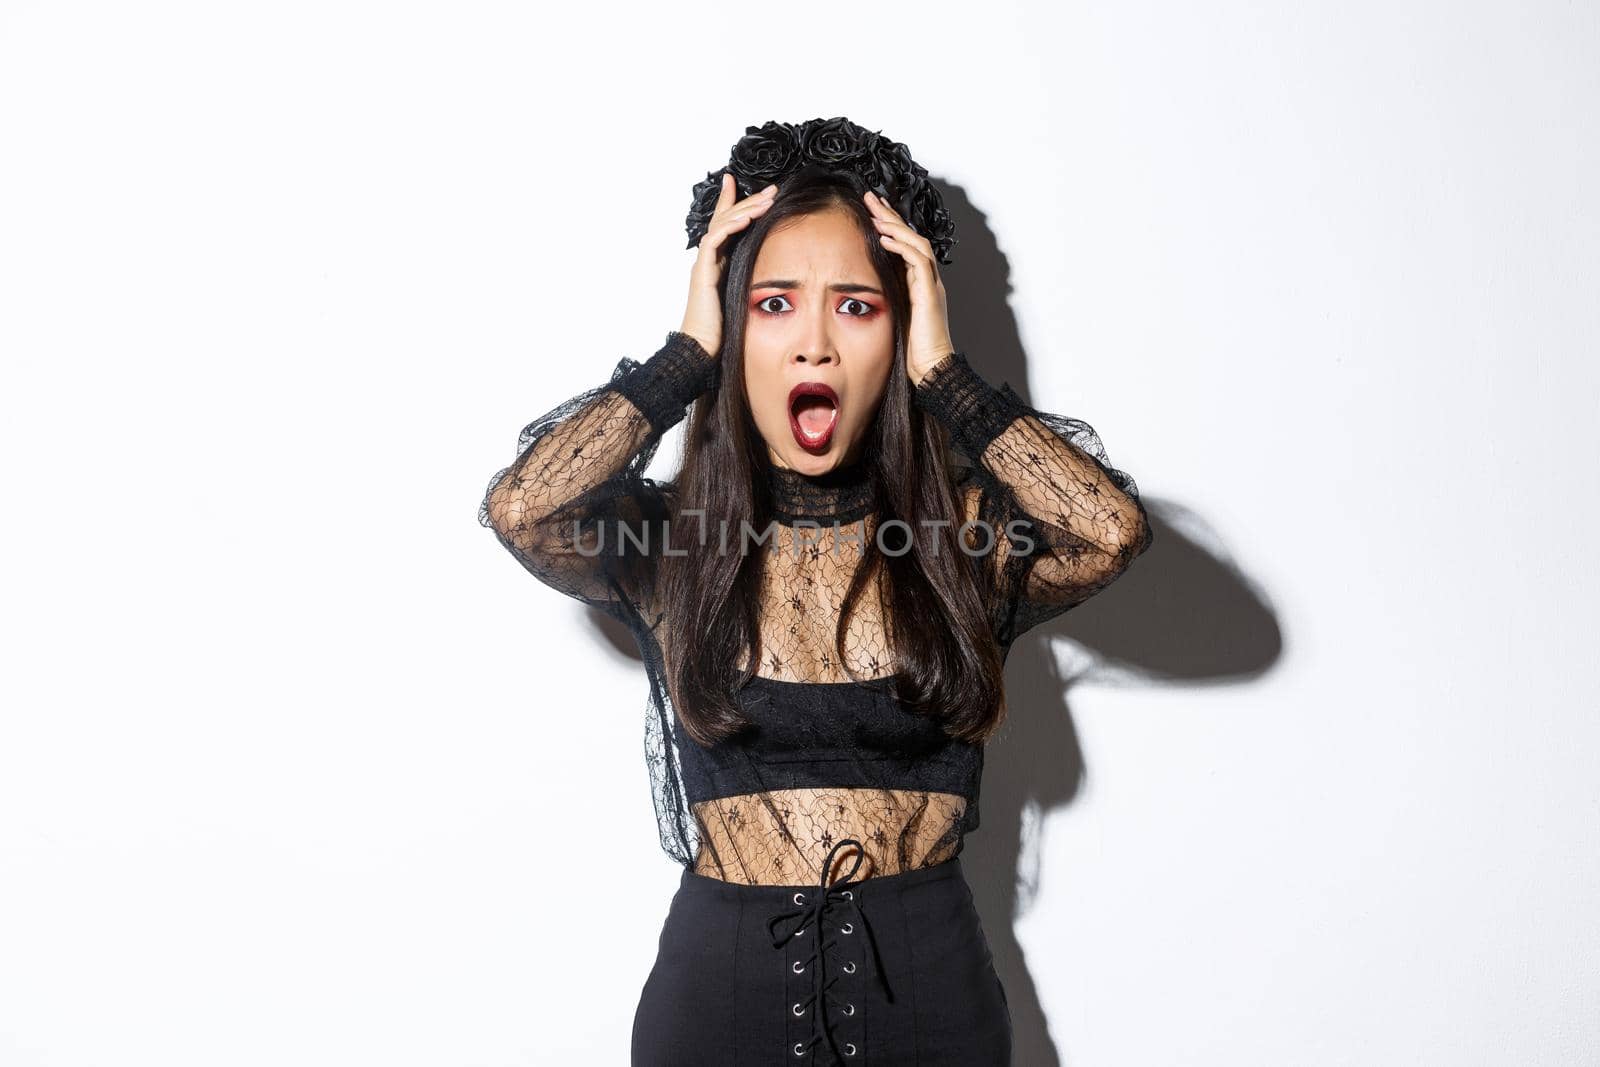 Image of horrified and shocked asian woman in gothic lace dress and wreath looking ambushed, wearing halloween costume, gasping and looking concerned, standing over white background.